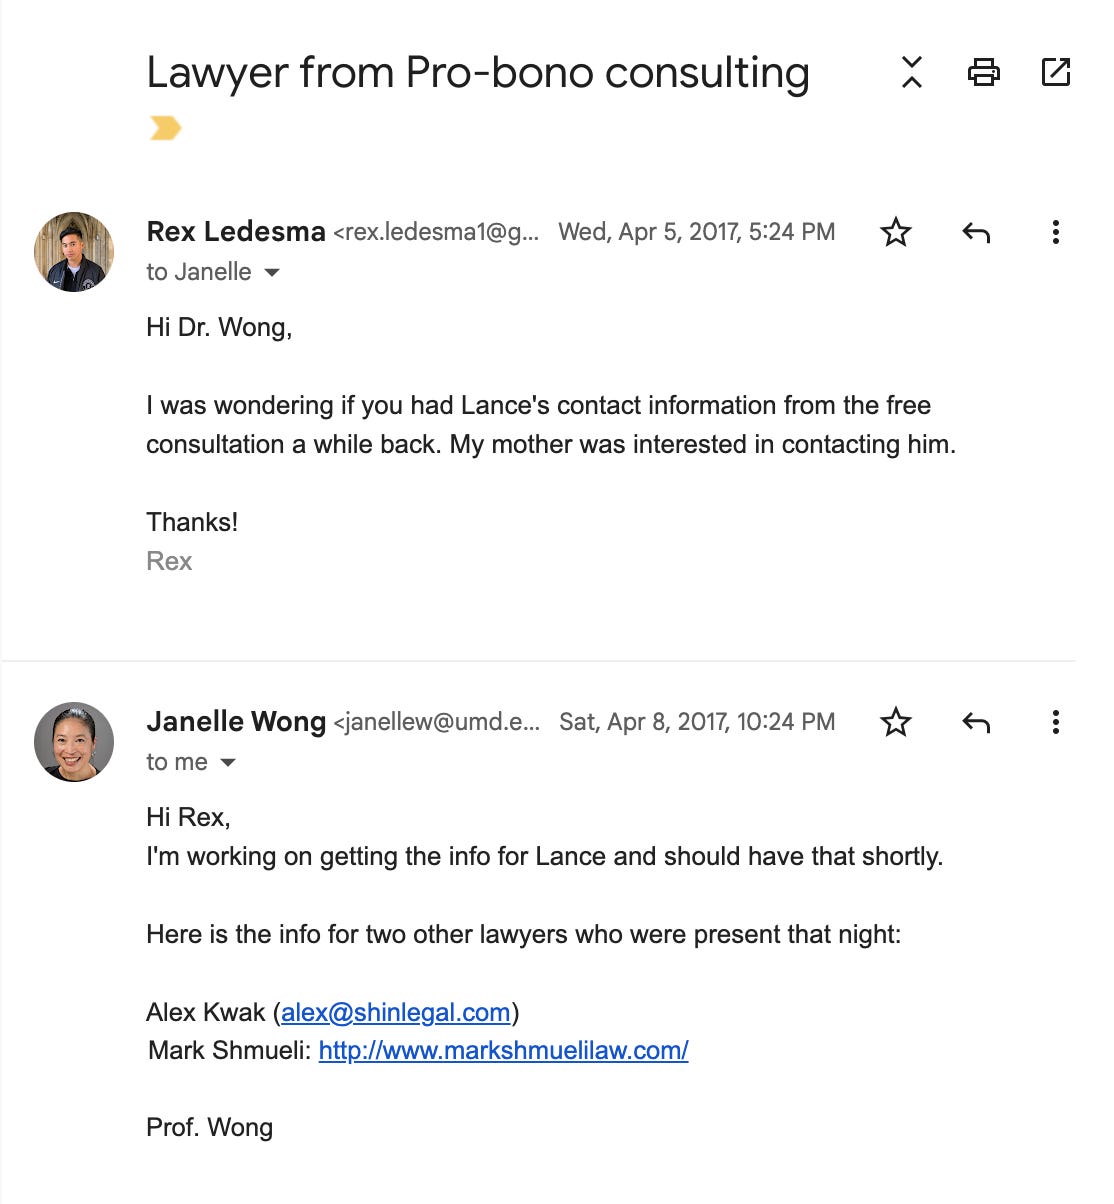 An email to get the lawyer's contact information.